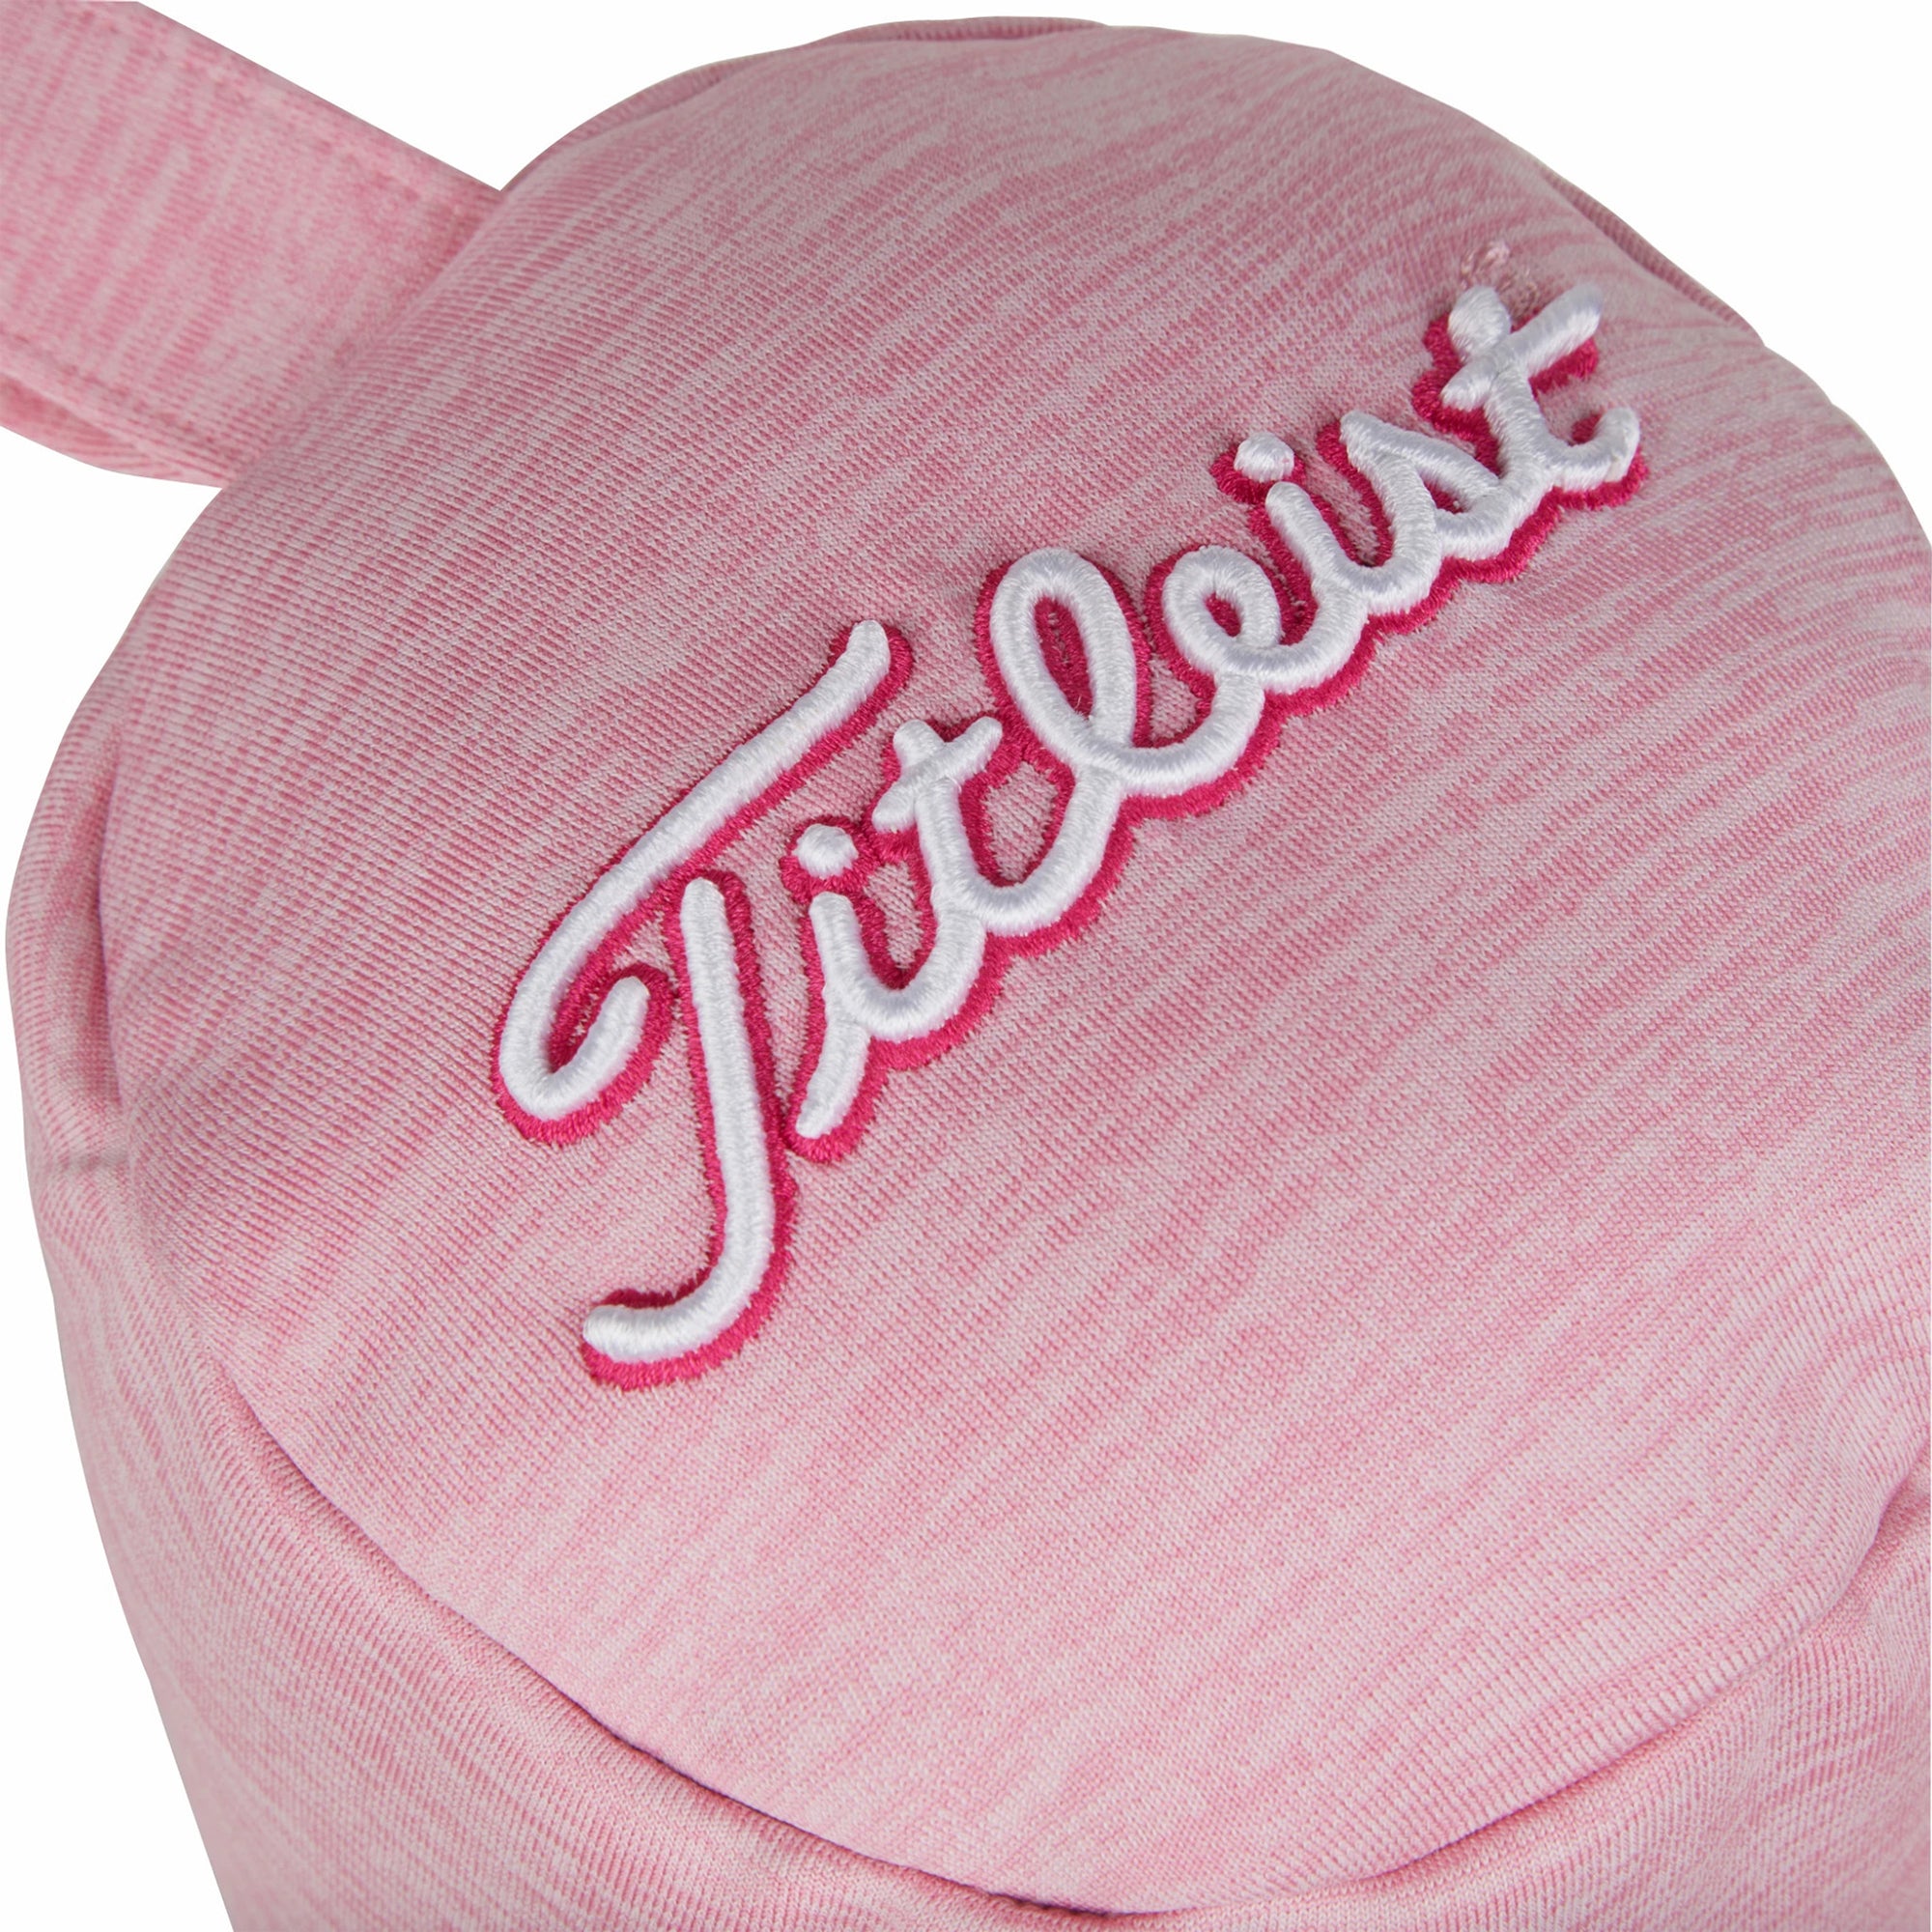 titleist-pink-out-le-barrell-driver-headcover-ta21pnkhc-dr